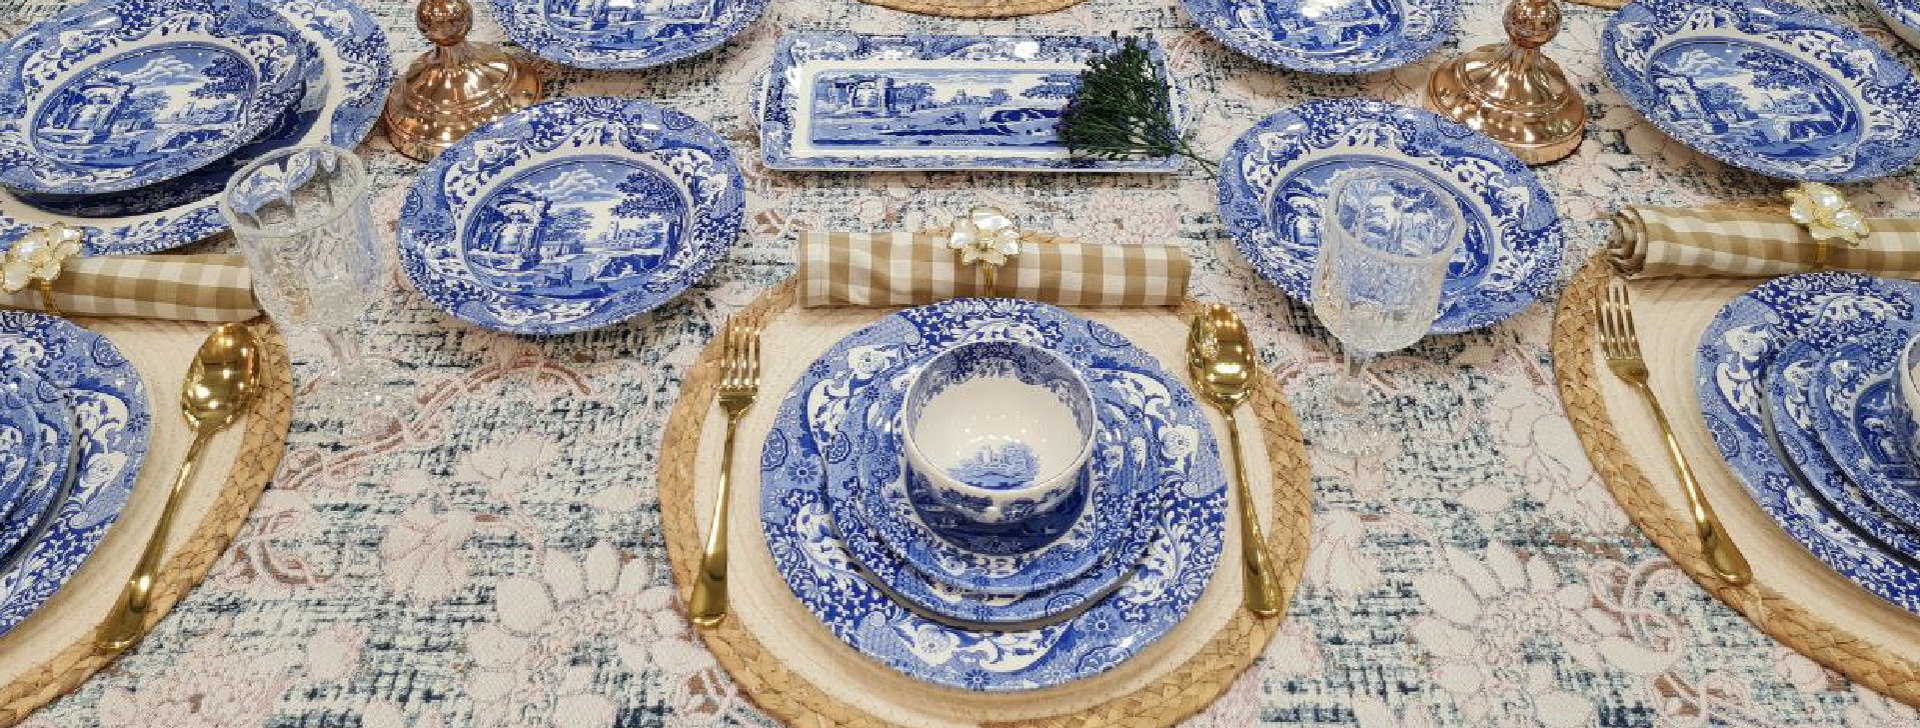 Table Setting Guide from Basic Diner to Formal Dinner